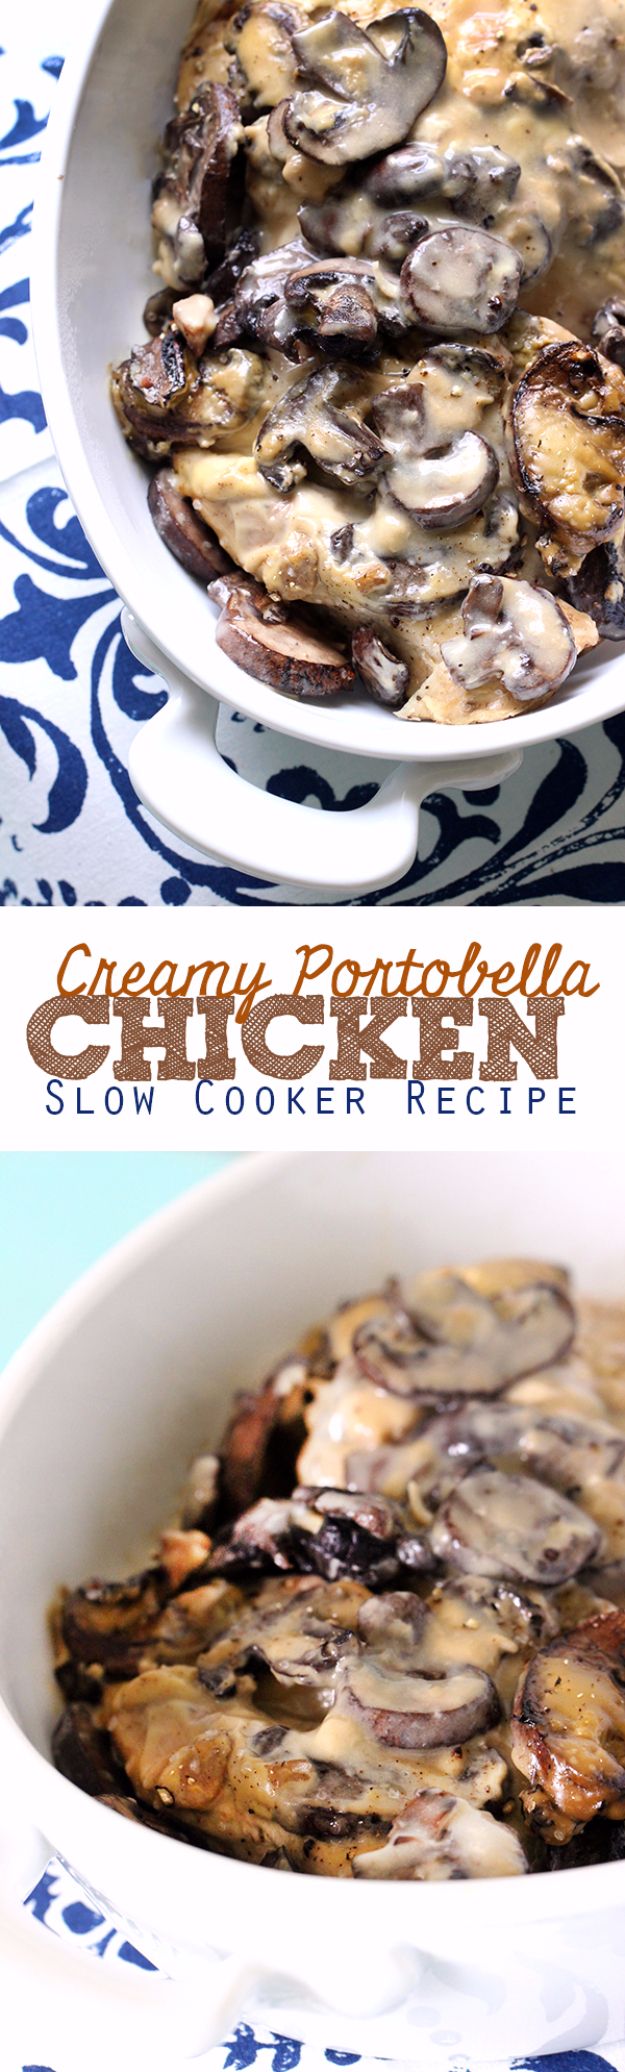 Healthy Crockpot Recipes to Make and Freeze Ahead - Slow Cooker Creamy Portobella Chicken - Easy and Quick Dinners, Soups, Sides You Make Put In The Freezer for Simple Last Minute Cooking - Low Fat Chicken, beef stew recipe